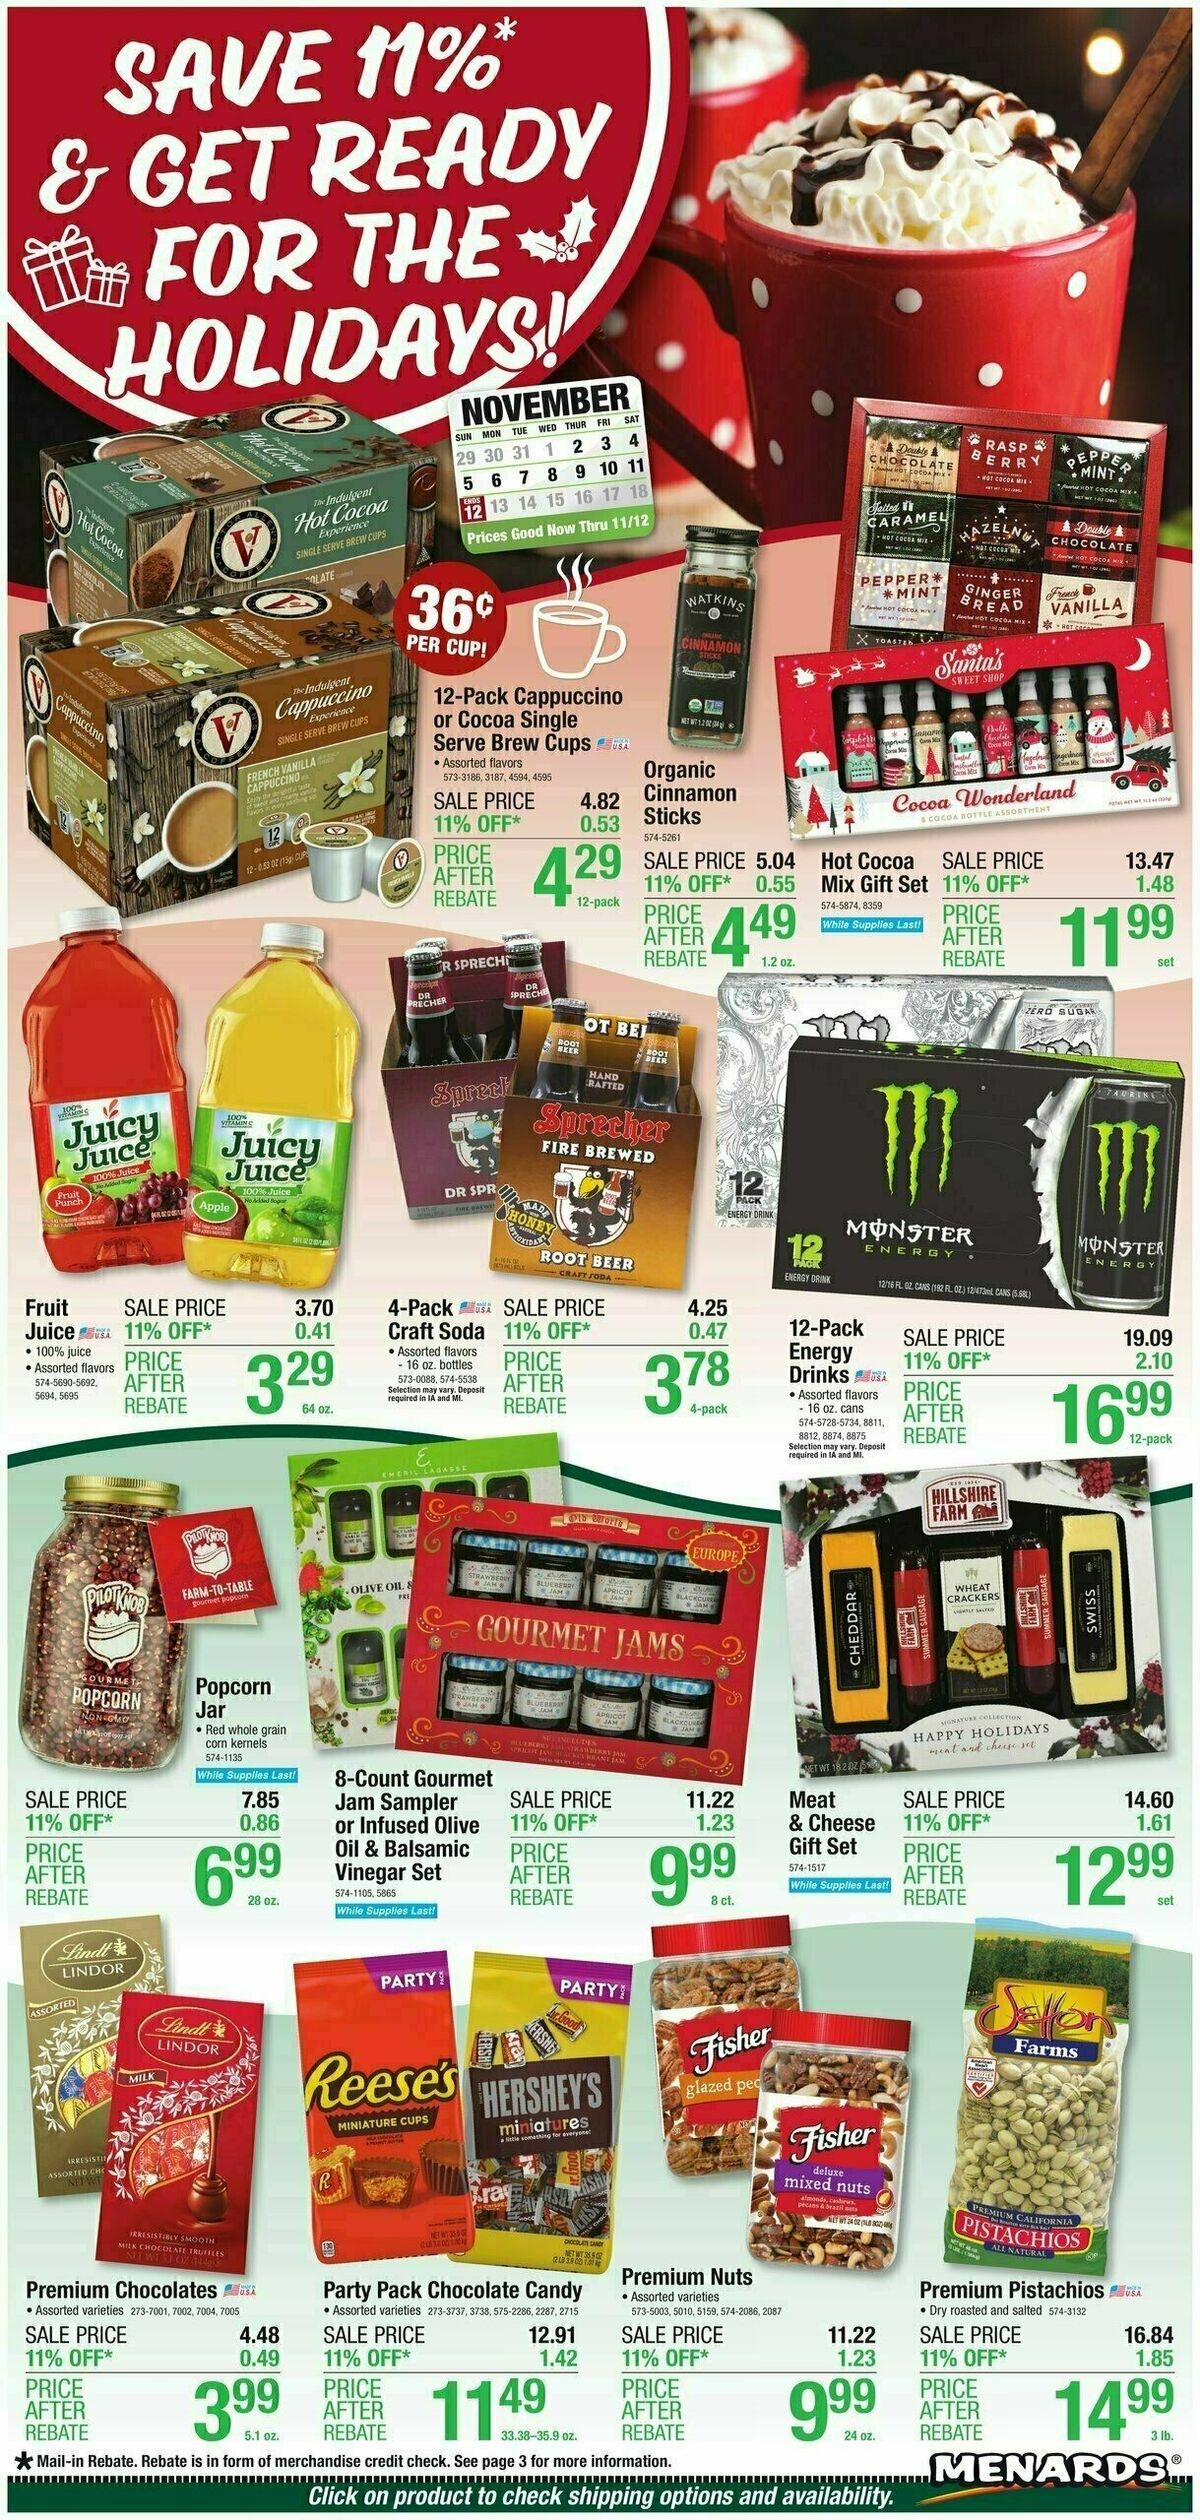 Menards Home Essentials Weekly Ad from November 1